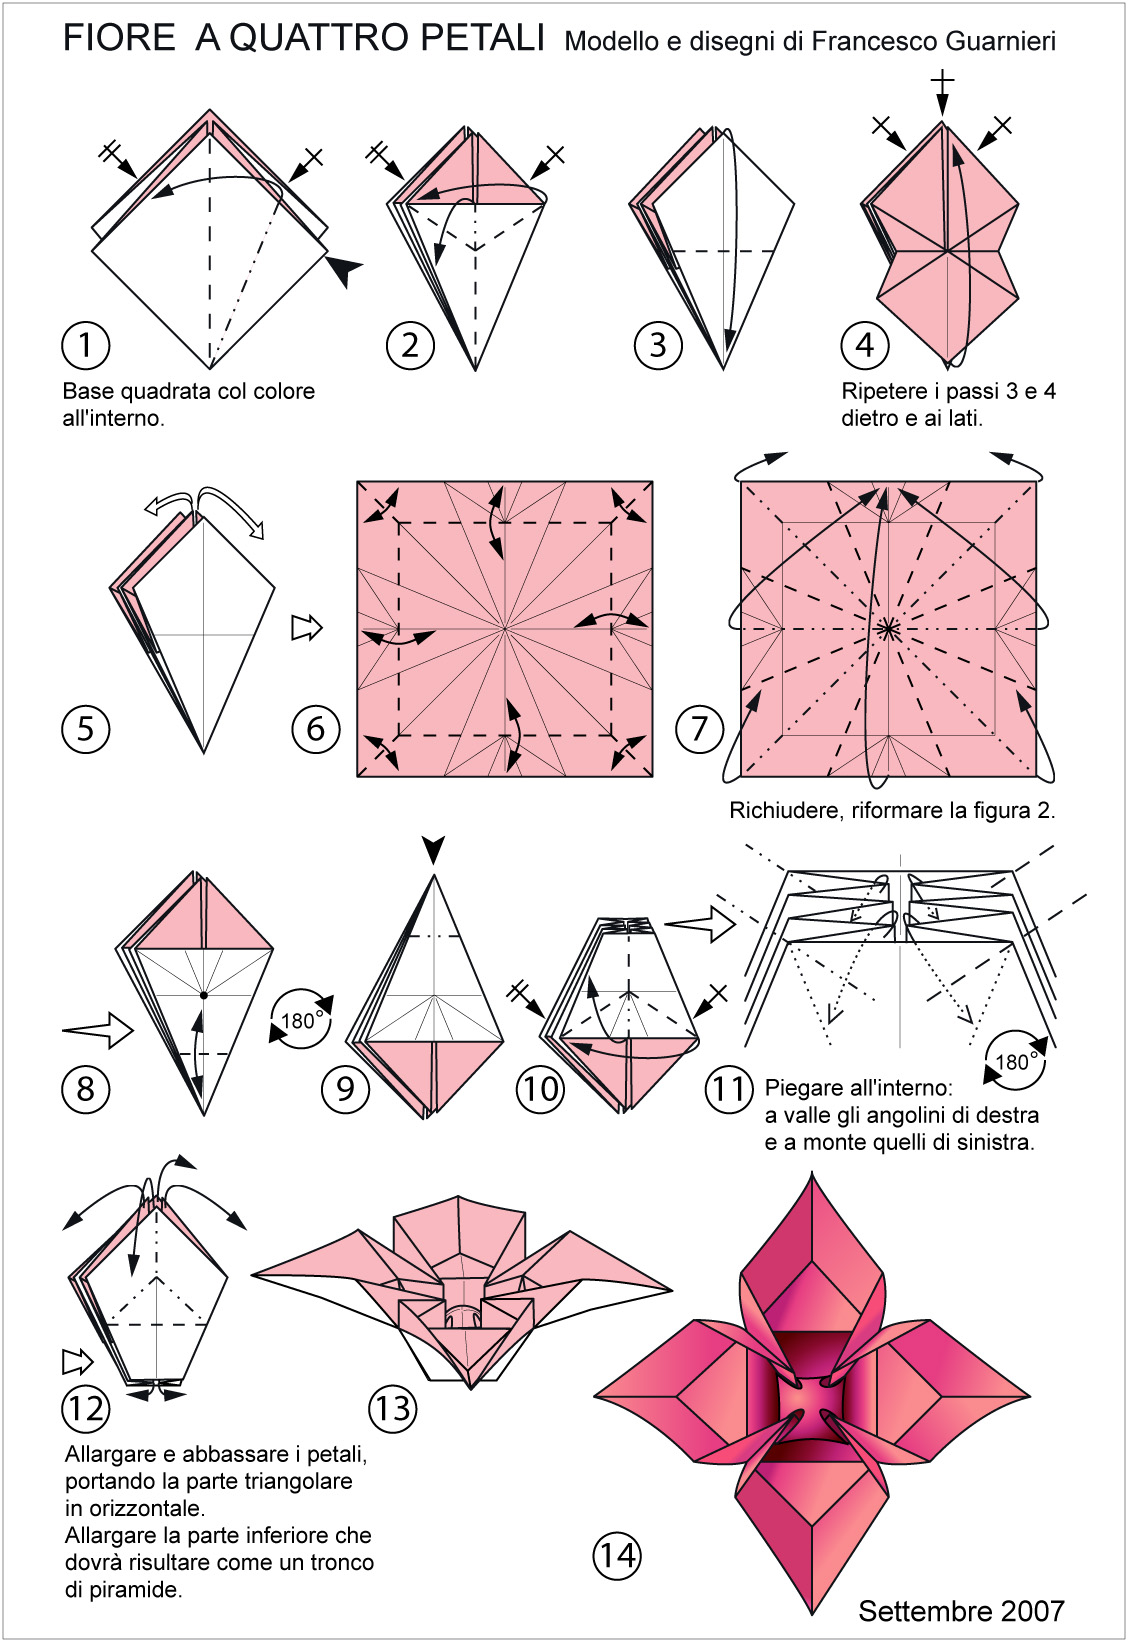 how to make origami flowers